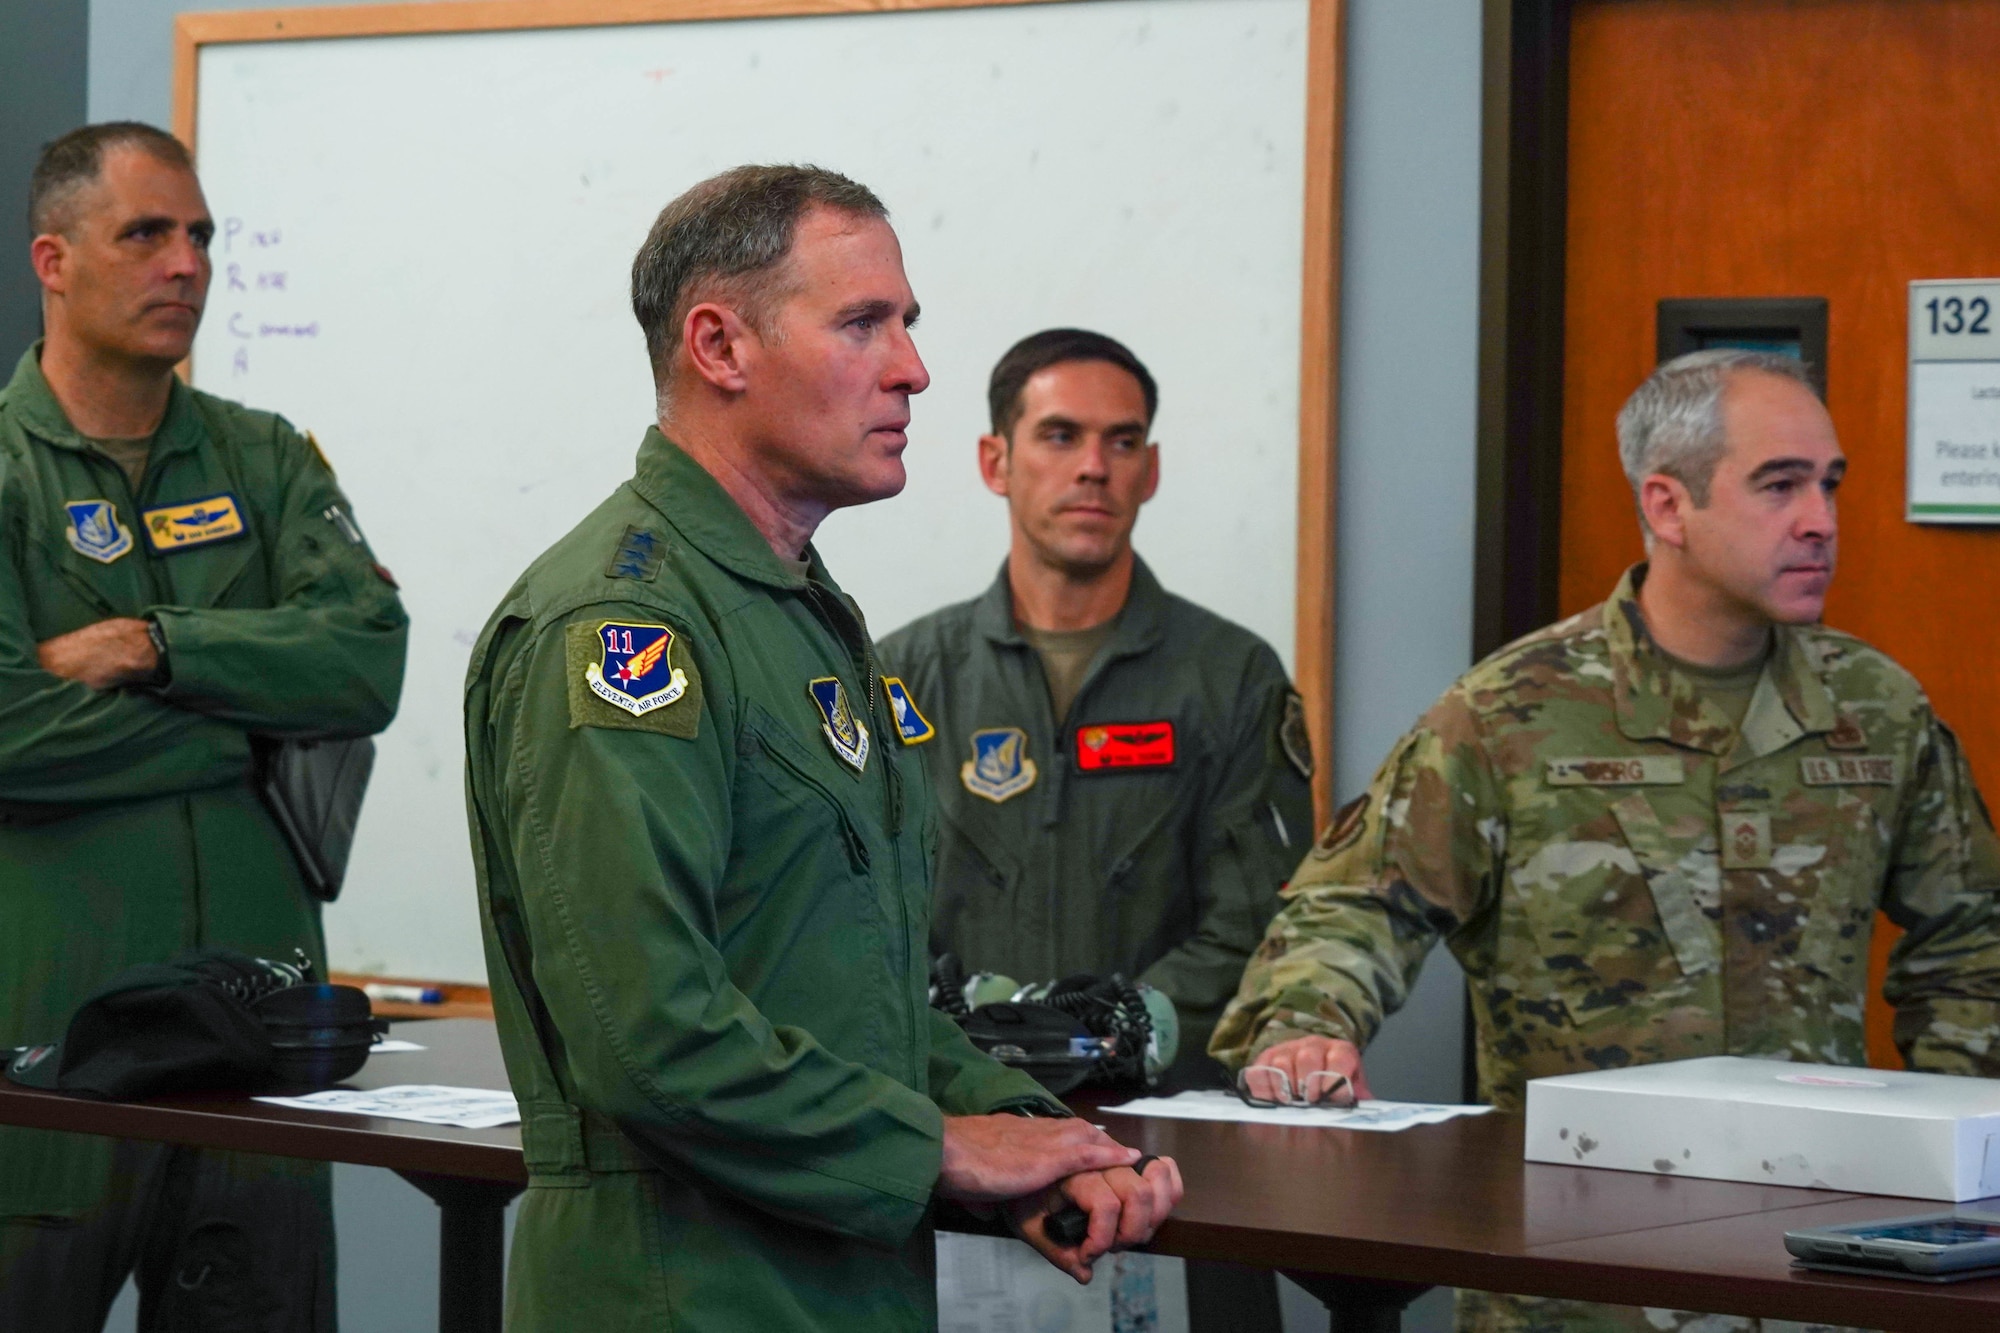 U.S. Air Force Lt. Gen. David A. Krumm, commander of Alaskan North American Aerospace Defense Command Region, Alaskan Command, and Eleventh Air Force, watches the Pacific Air Forces C-17 Demonstration Team conduct training operations at Marine Corps Base Hawaii, during his visit with Airmen assigned to Joint Base Pearl Harbor-Hickam, Hawaii, July 20, 2021.  Krumm visited several squadrons around the 15th Wing to gain an in-depth exposure to their unique mission and how the wing contributes to the Indo-Pacific region’s security and stability. (U.S. Air Force photo by Airman 1st Class Makensie Cooper)